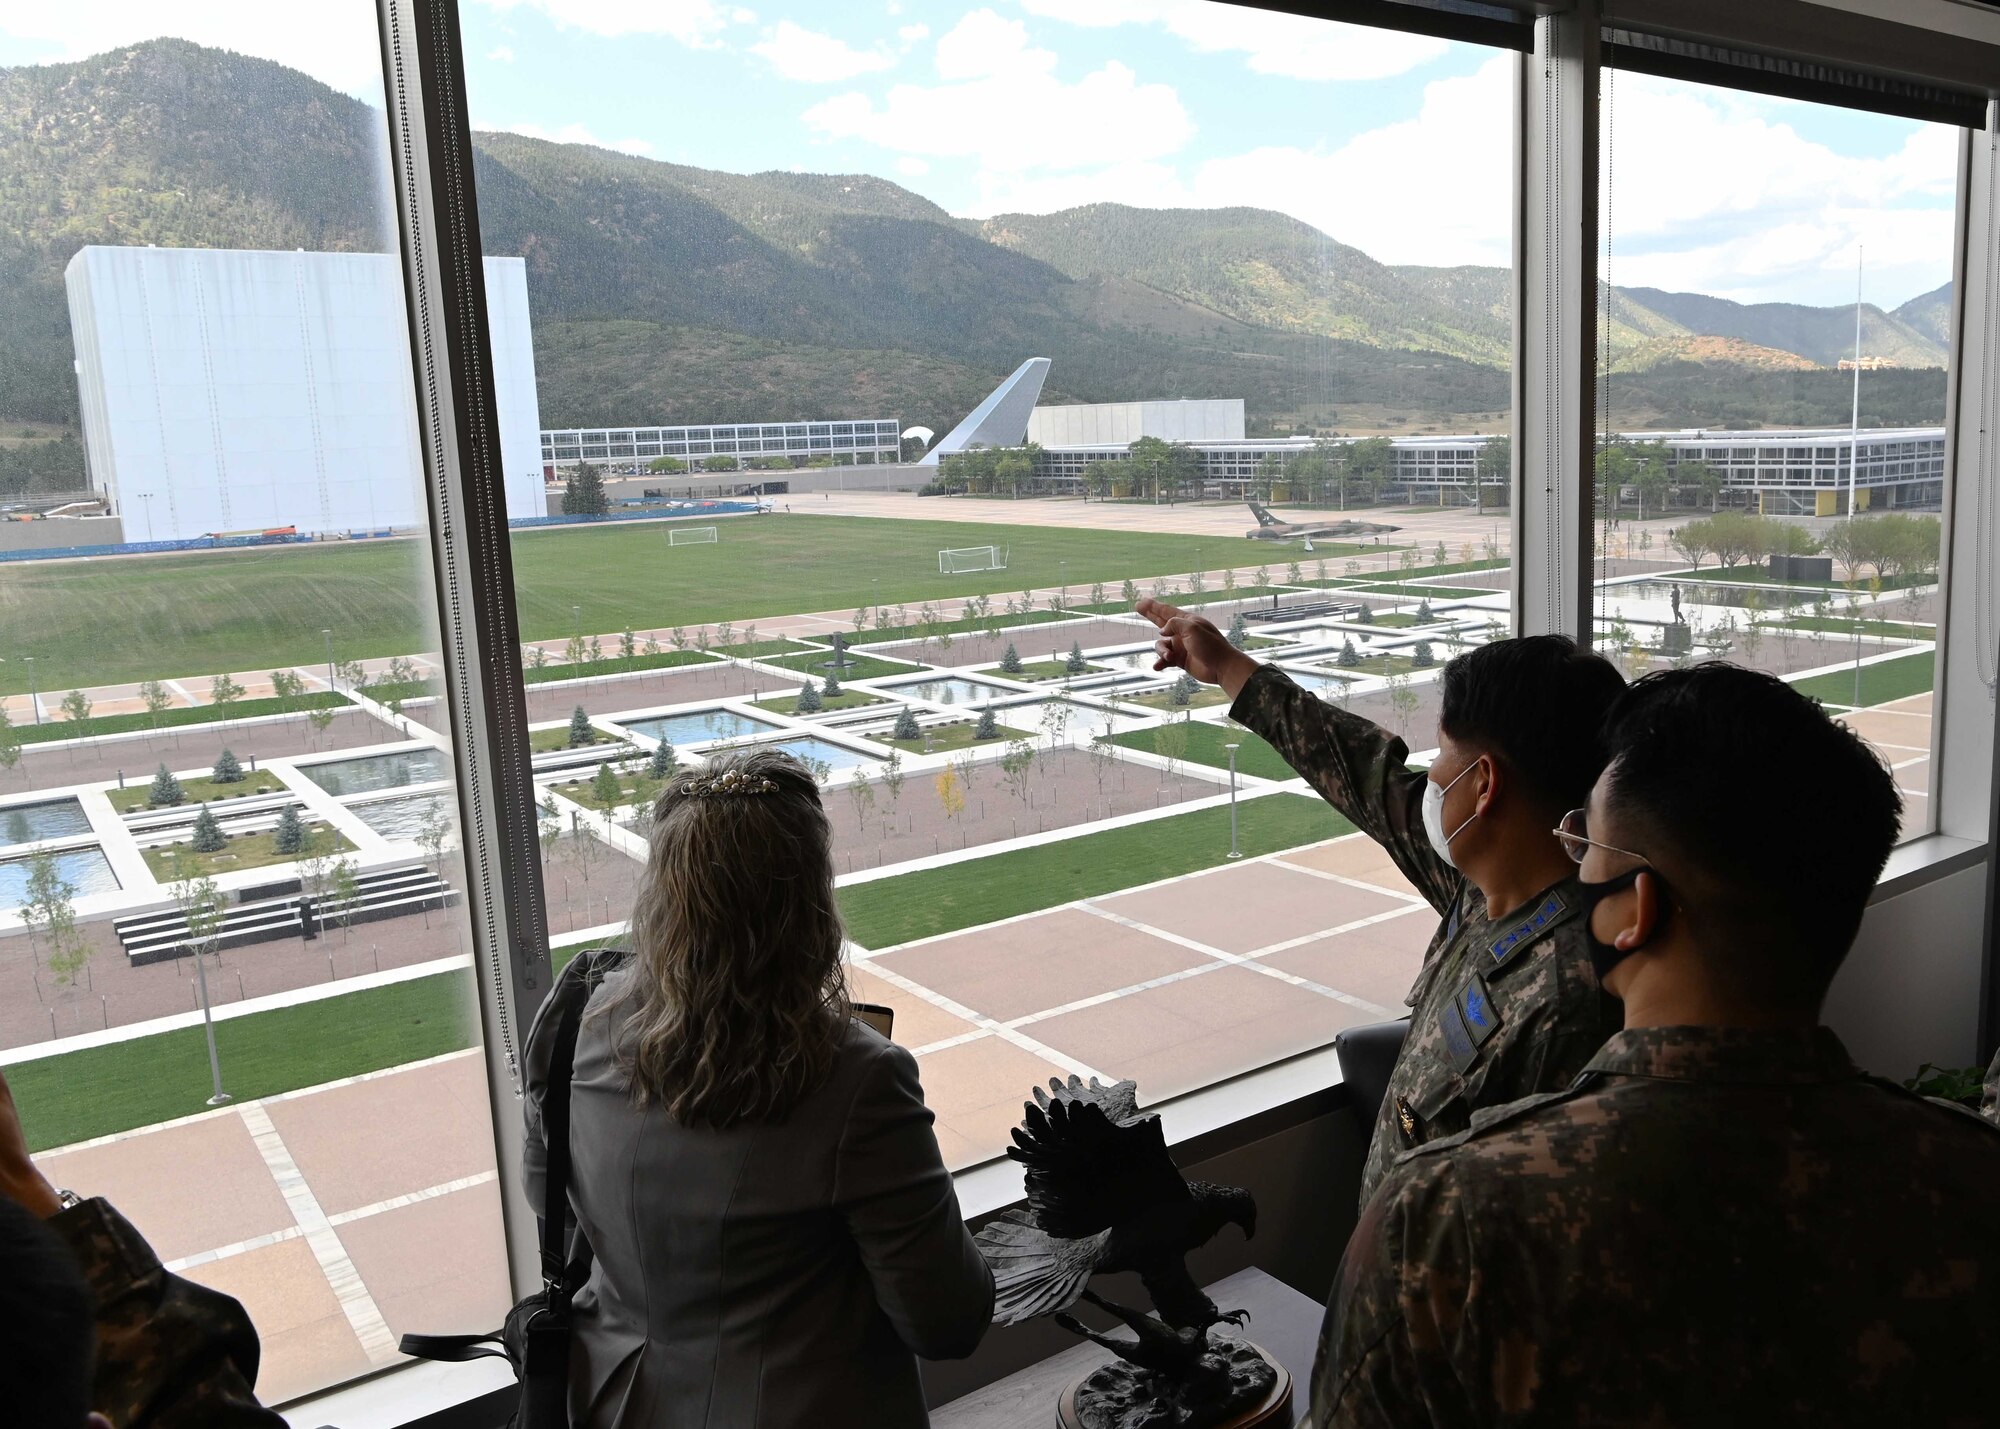 Republic of Korea Air Force Gen. Inho Park, ROKAF Chief of Staff, looks onto the terrazzo during his visit to the U.S. Air Force Academy